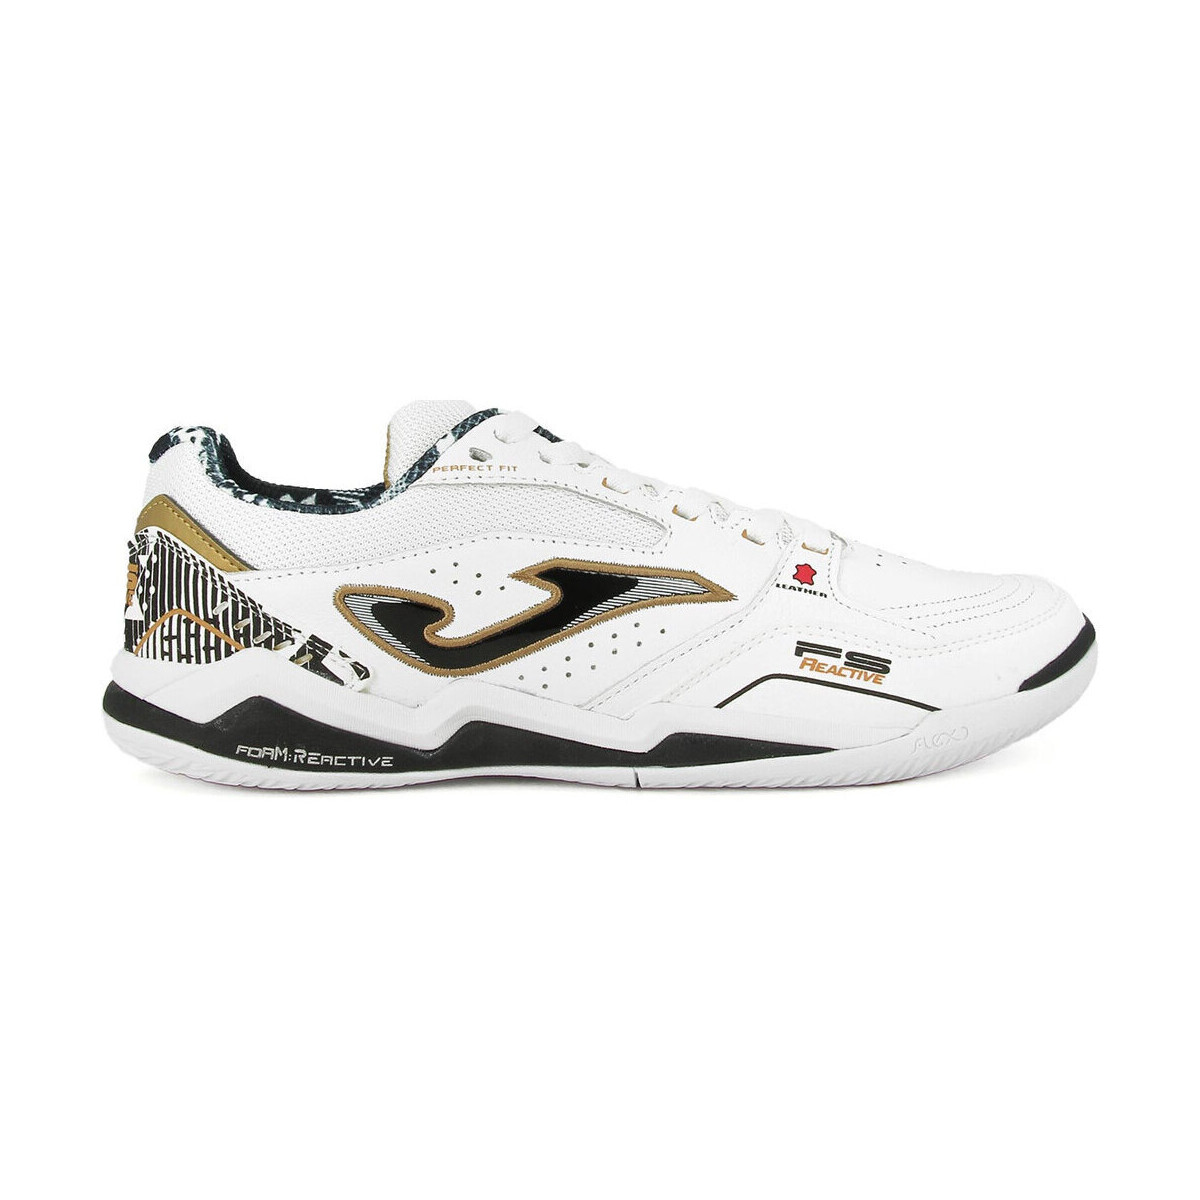 Chaussures Homme Football Joma FS REACTIVE IN Blanc